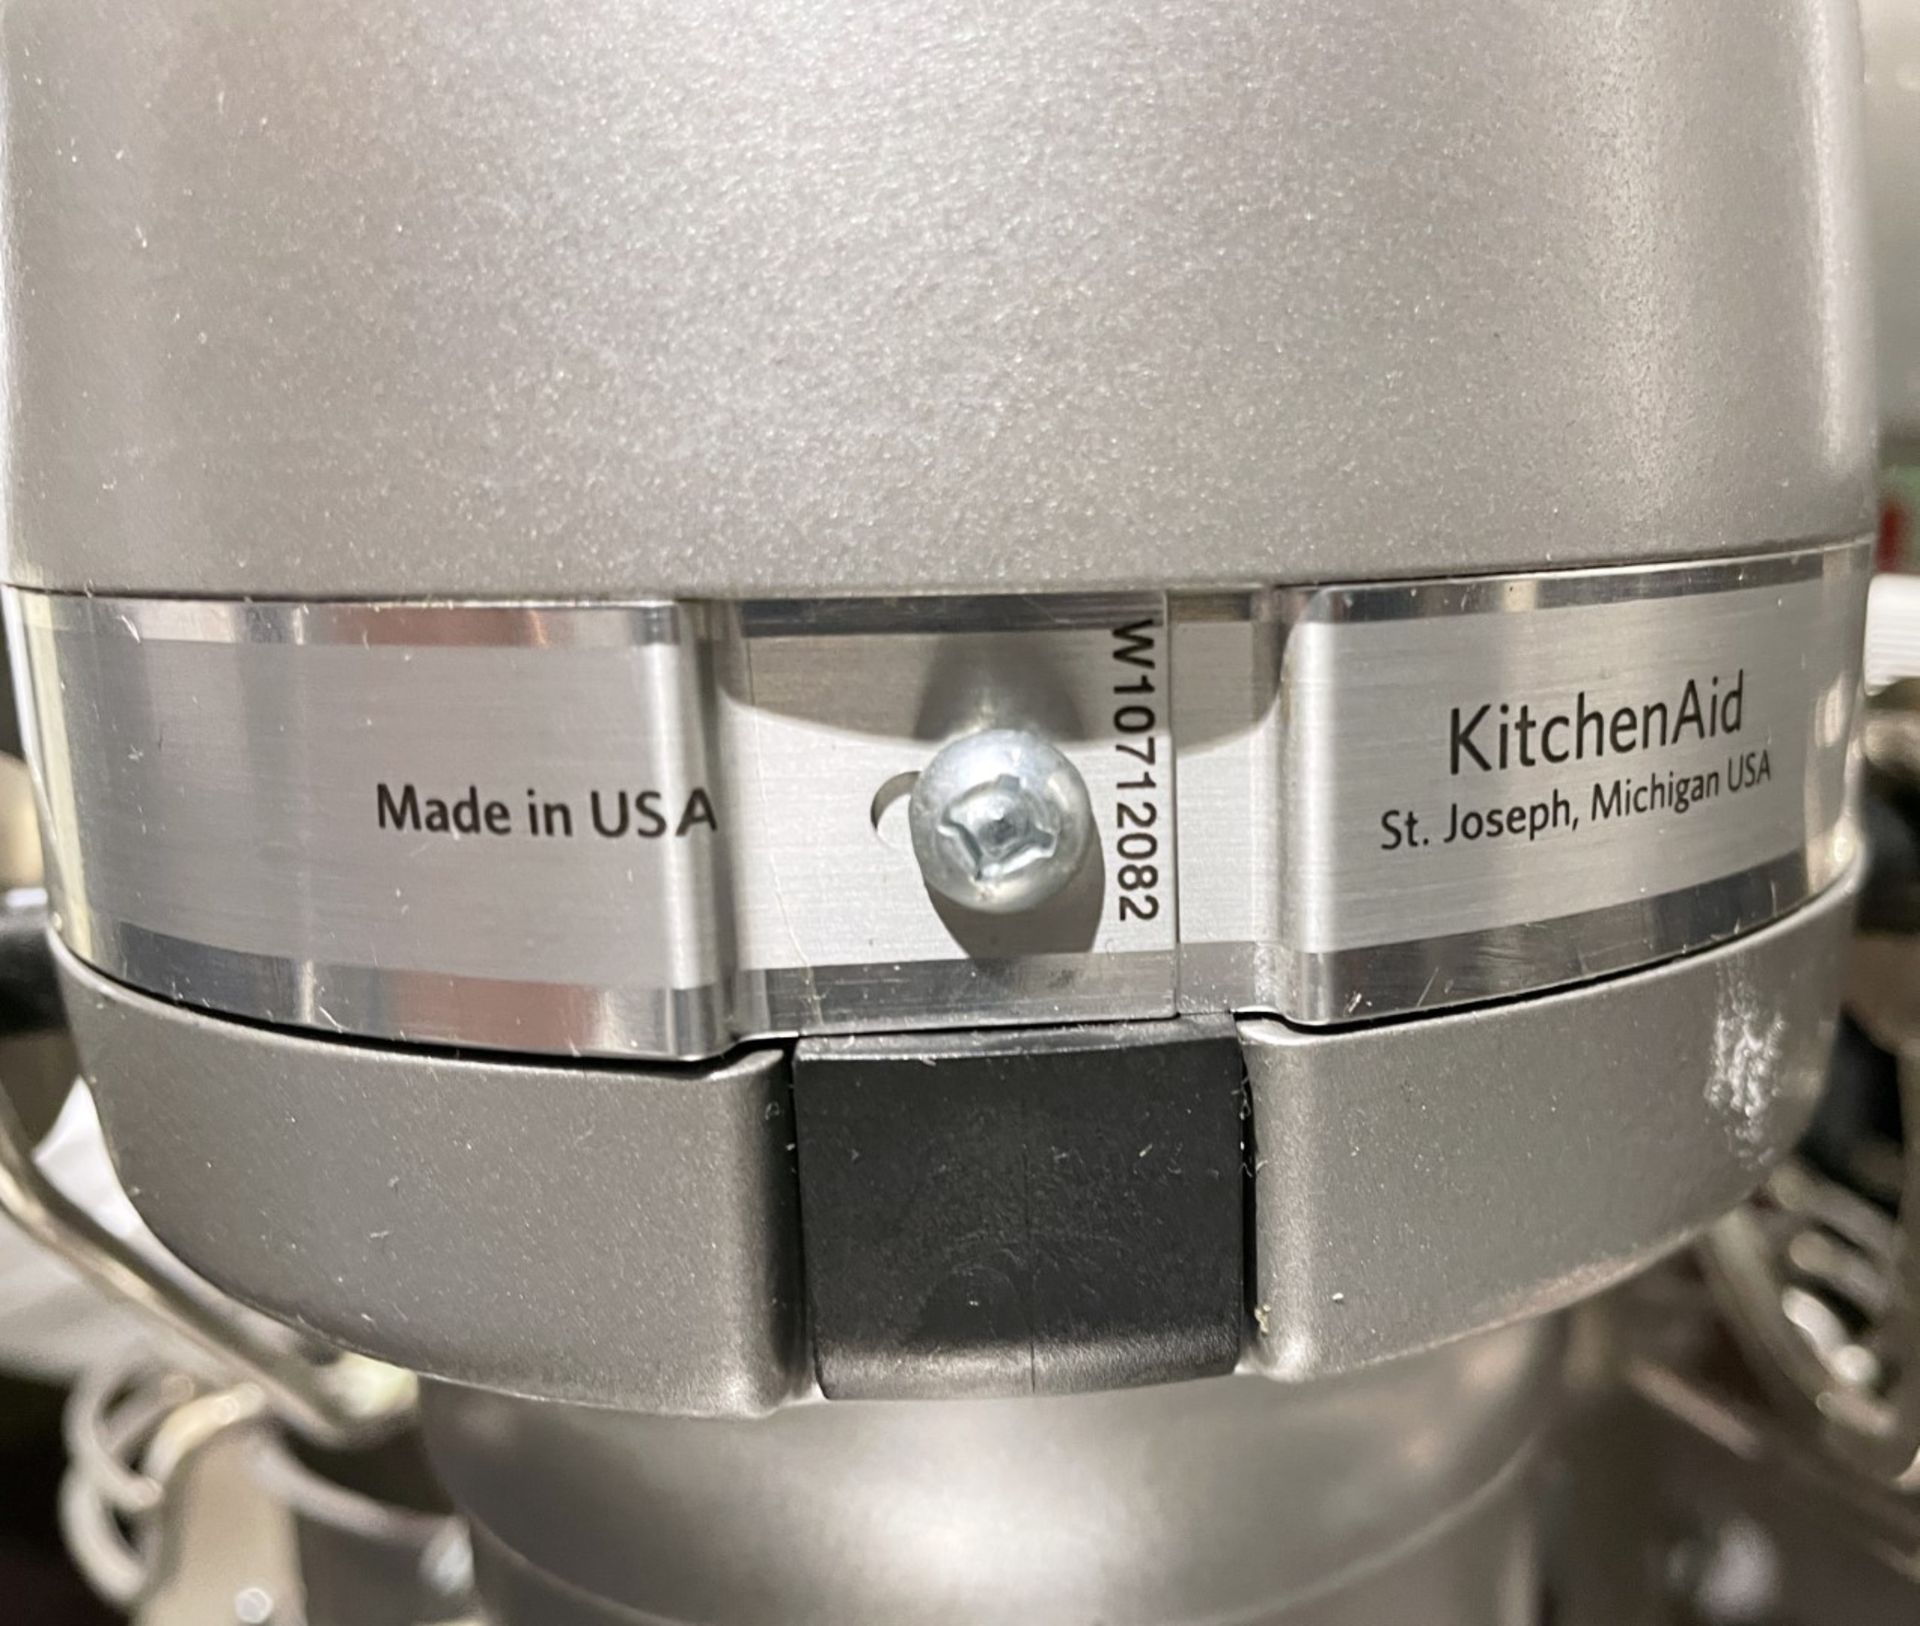 1 x Kitchenaid 6.9 Ltr Commercial Planetary Food Mixer - Model 5KSM7990XBSL - Includes Mixing Bowl - Image 3 of 16